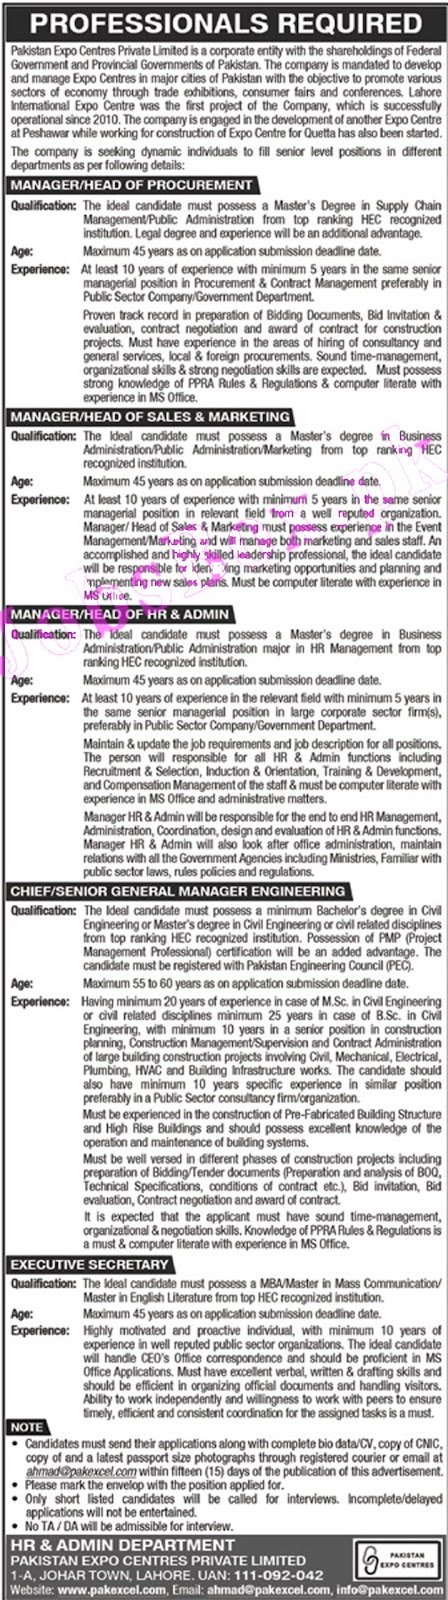 Pakistan Expo Centres Private Limited Jobs 2021